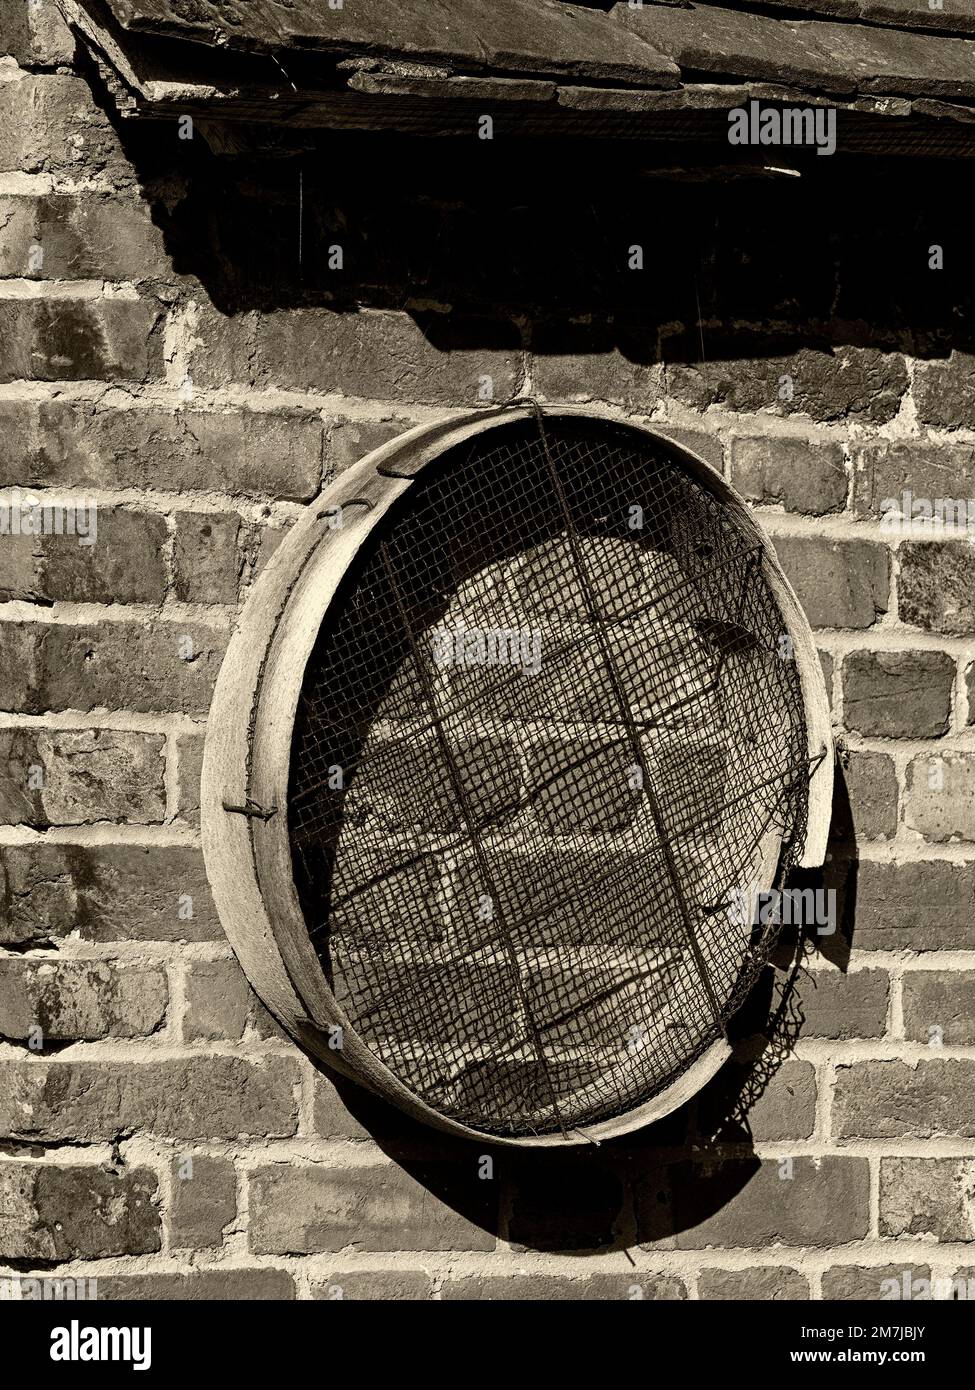 Black and white sepia toned image of an old fashioned garden riddle hanging on a brick wall Stock Photo